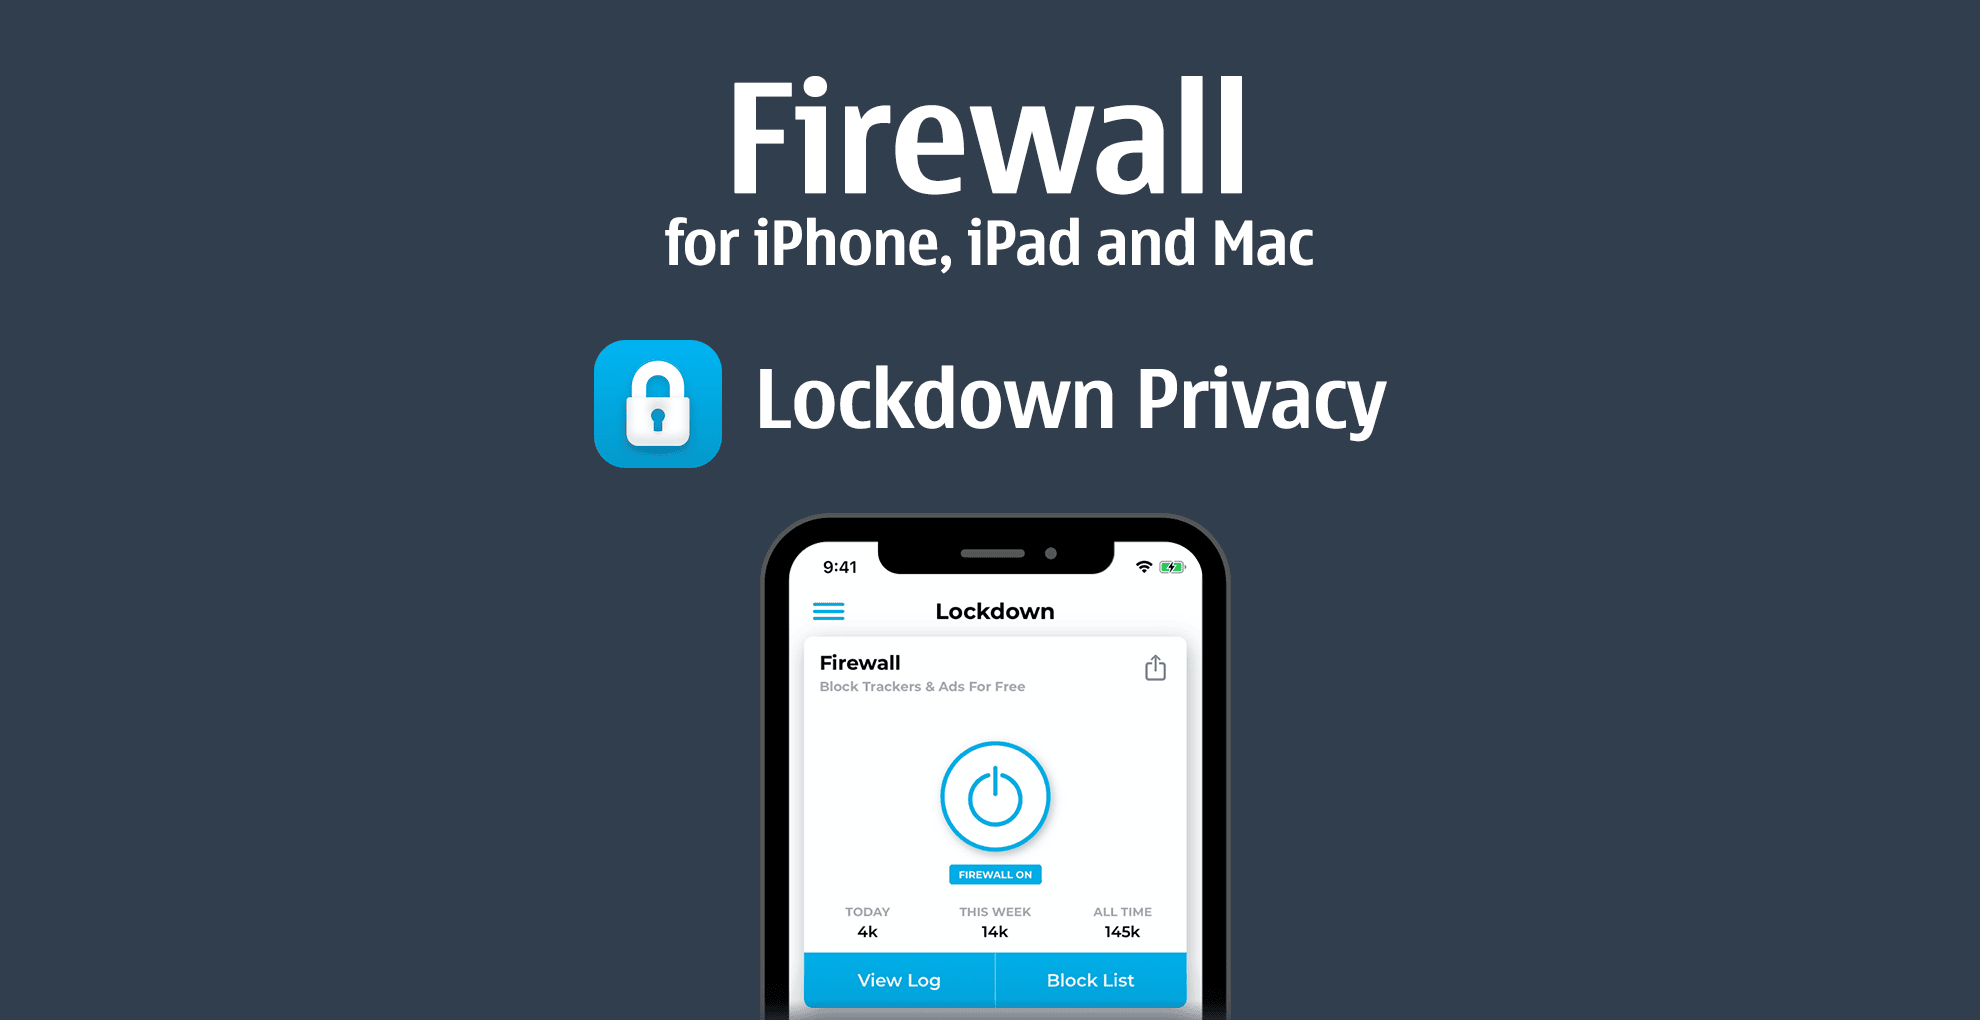 Firewall for iPhone, iPad and Mac - Lockdown Privacy